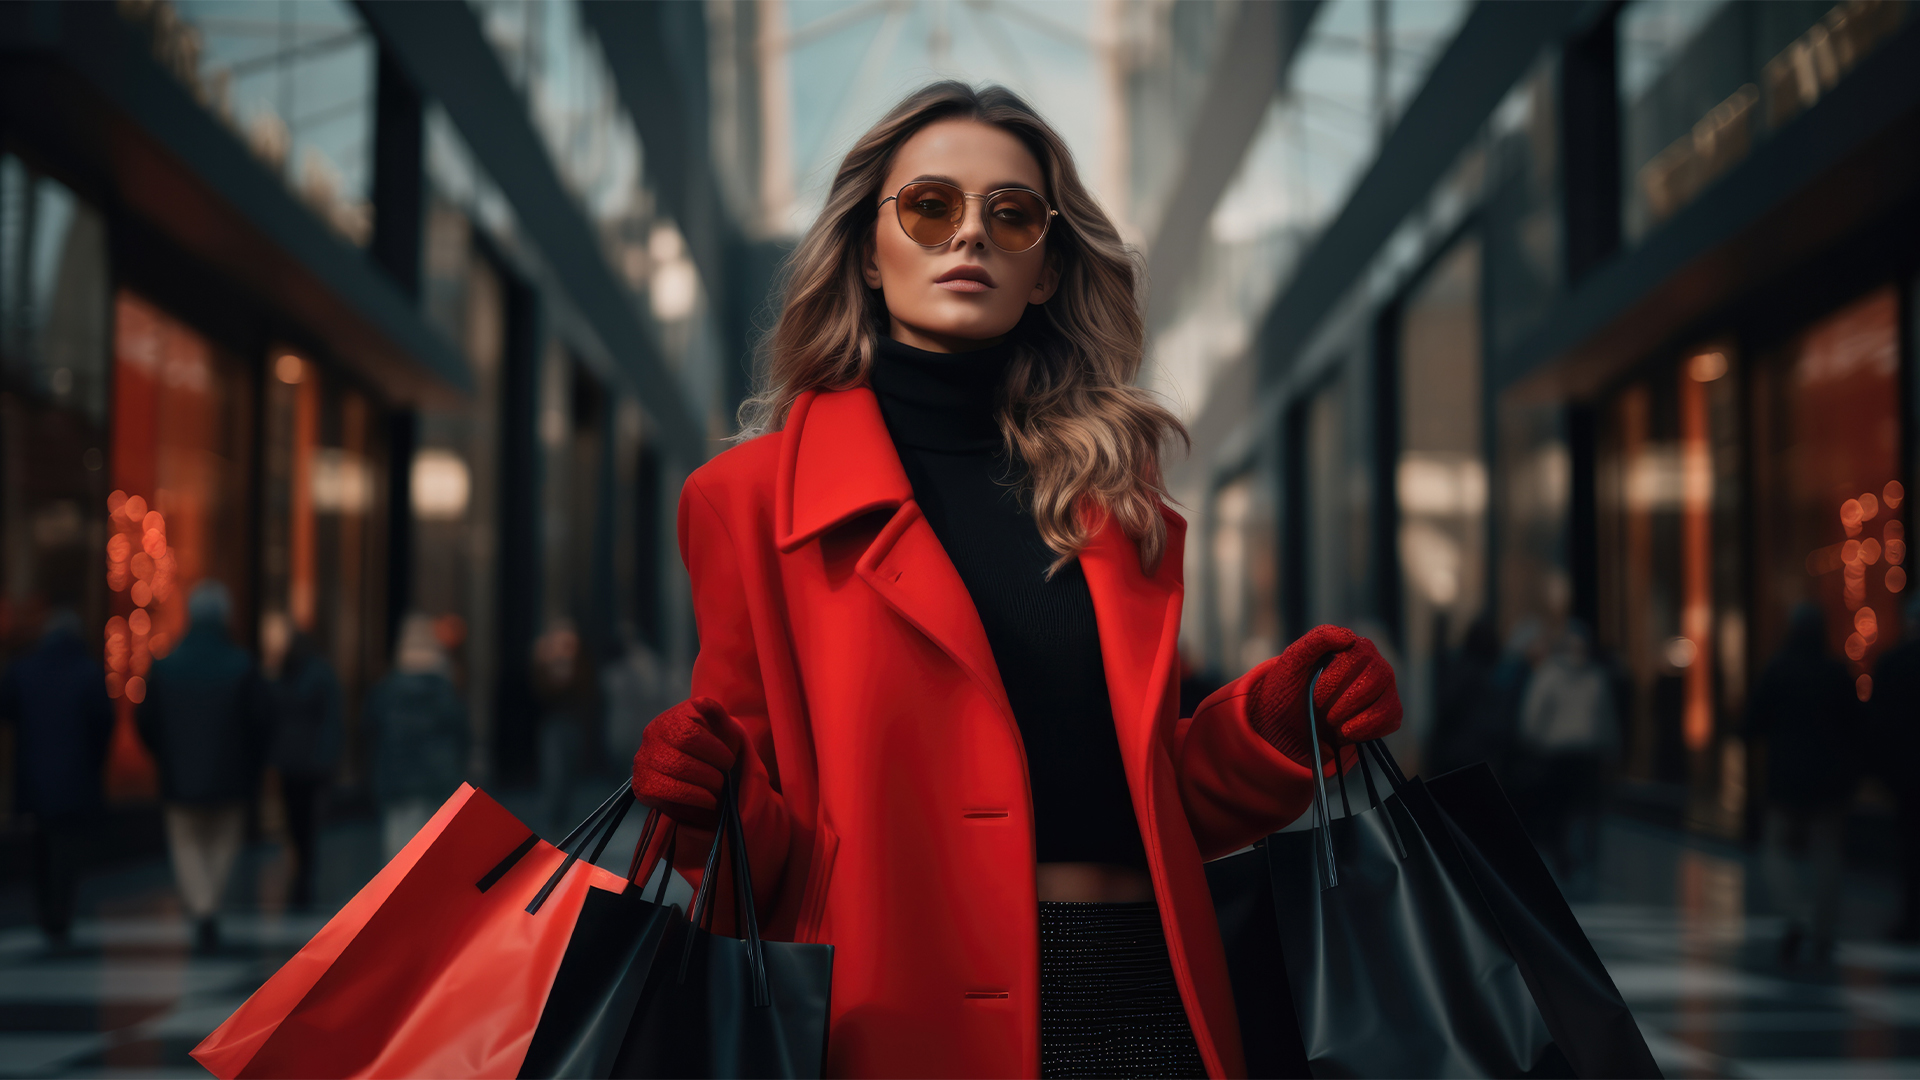 Woman in a red jacket with shopping bags